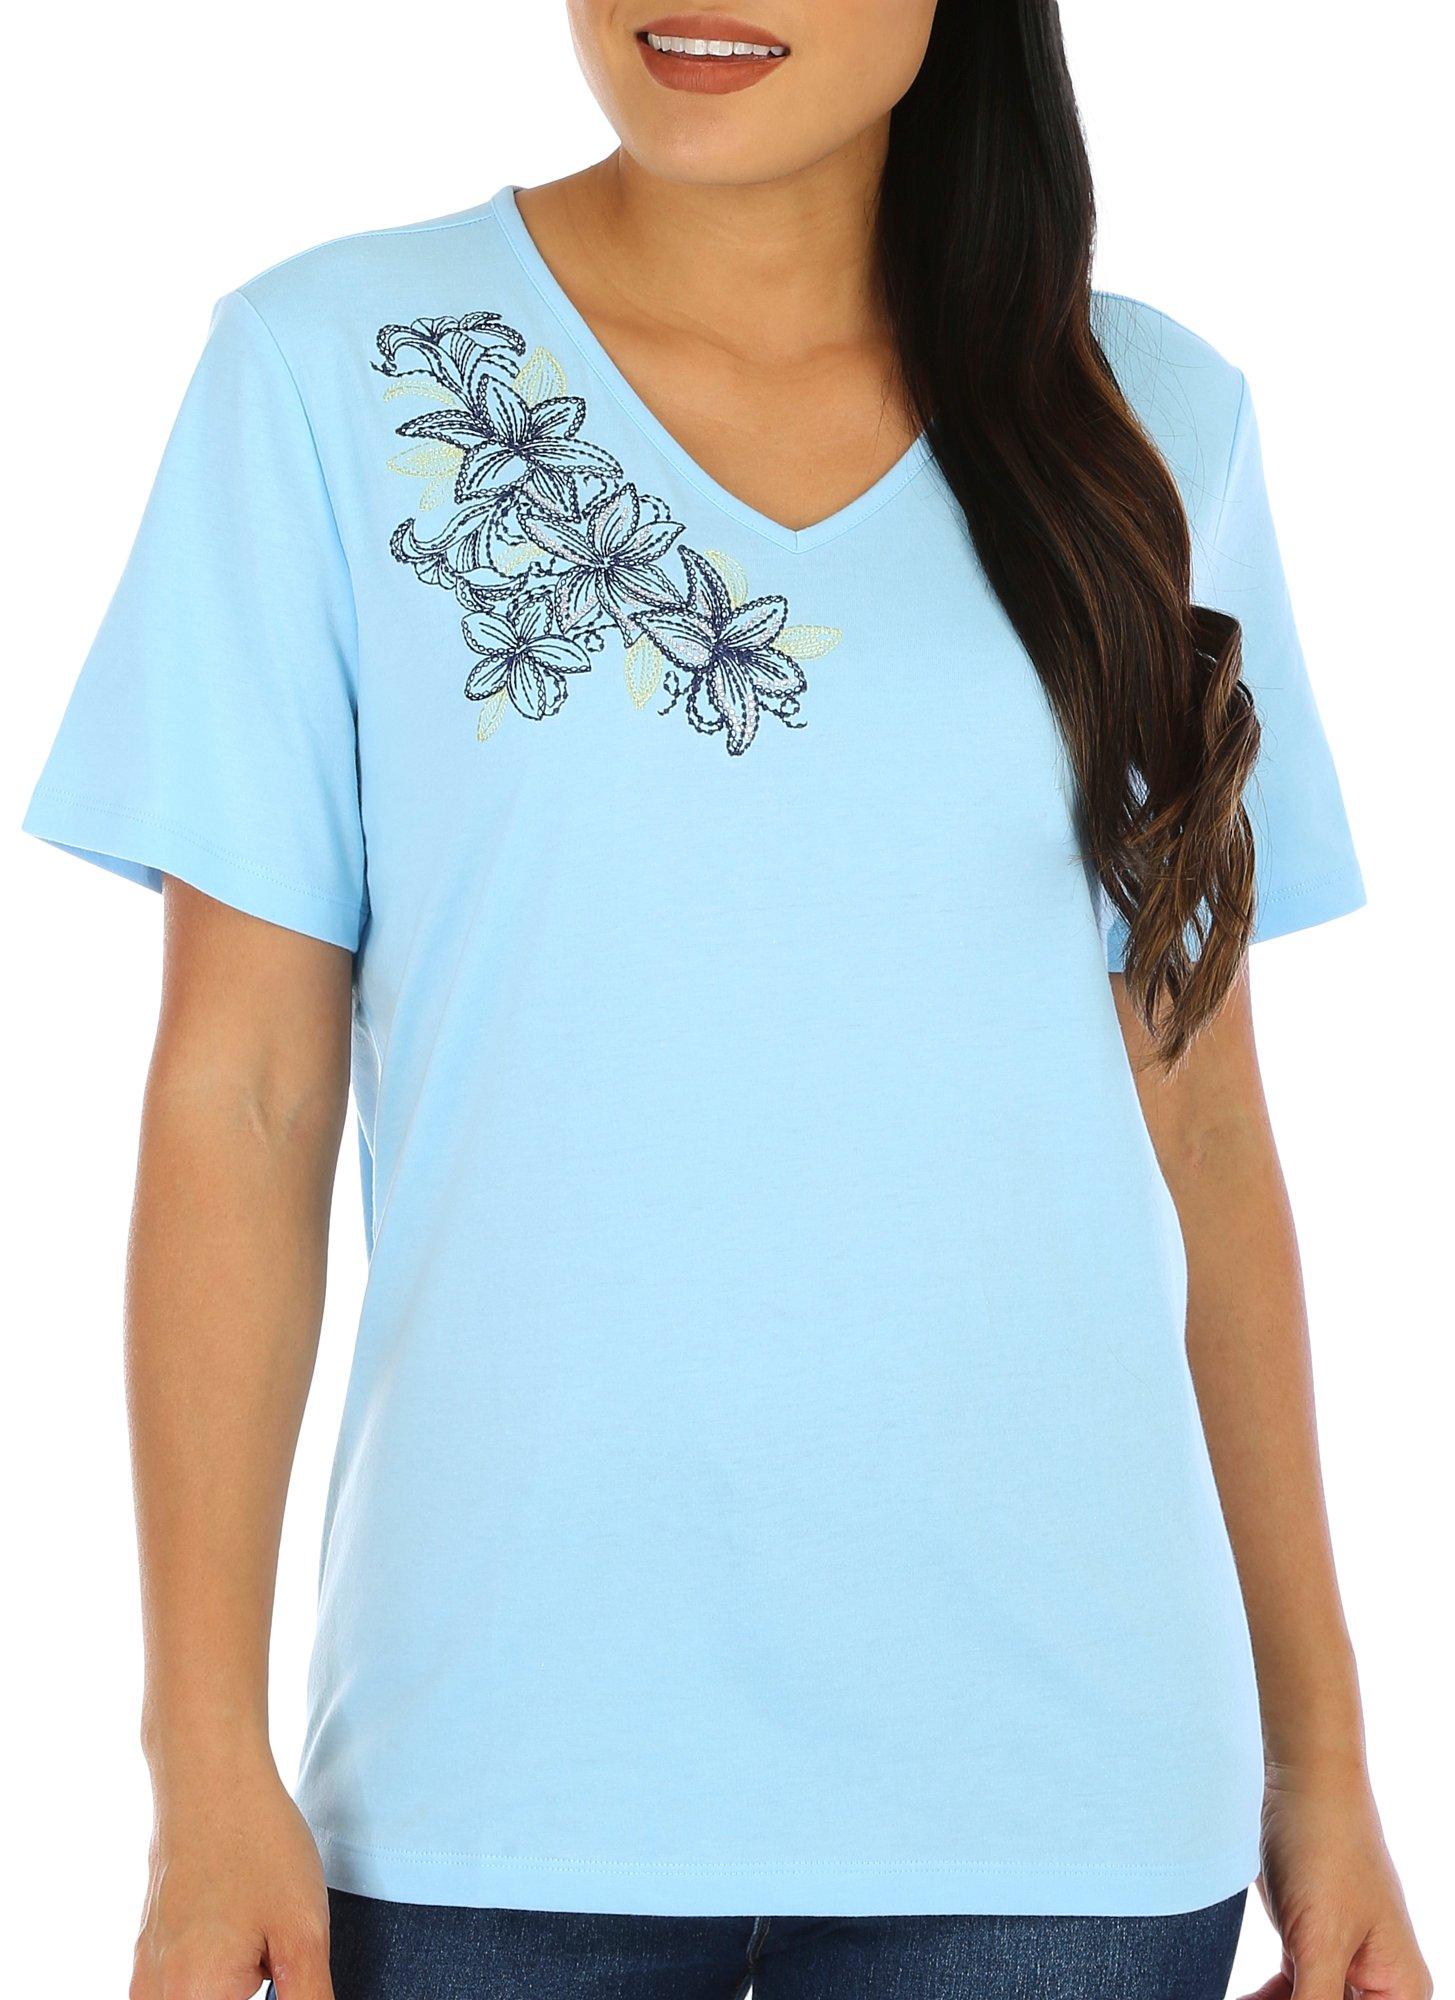 Womens Embroidered Floral Short Sleeve Top